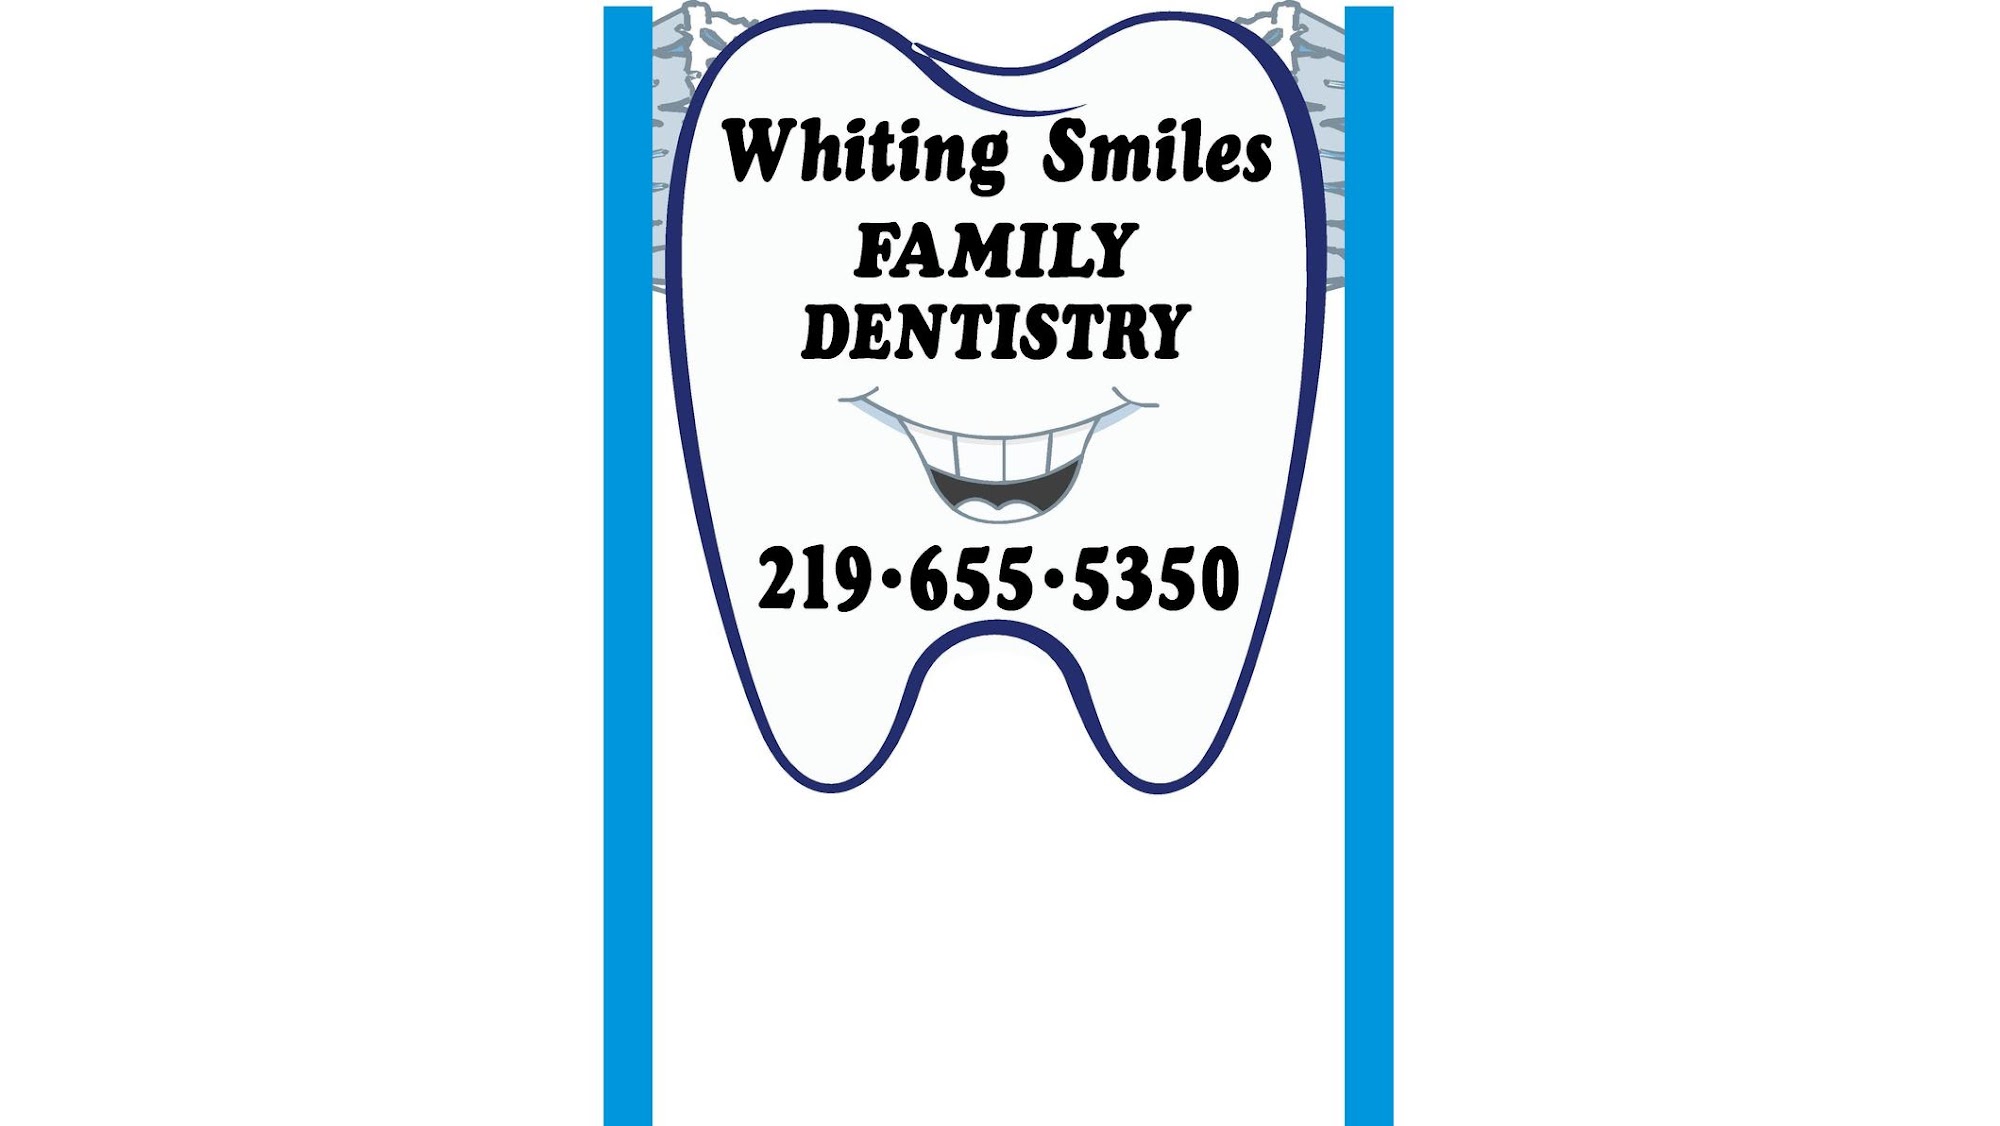 Whiting Smiles Family Dentistry 2075 Indianapolis Blvd, Whiting Indiana 46394